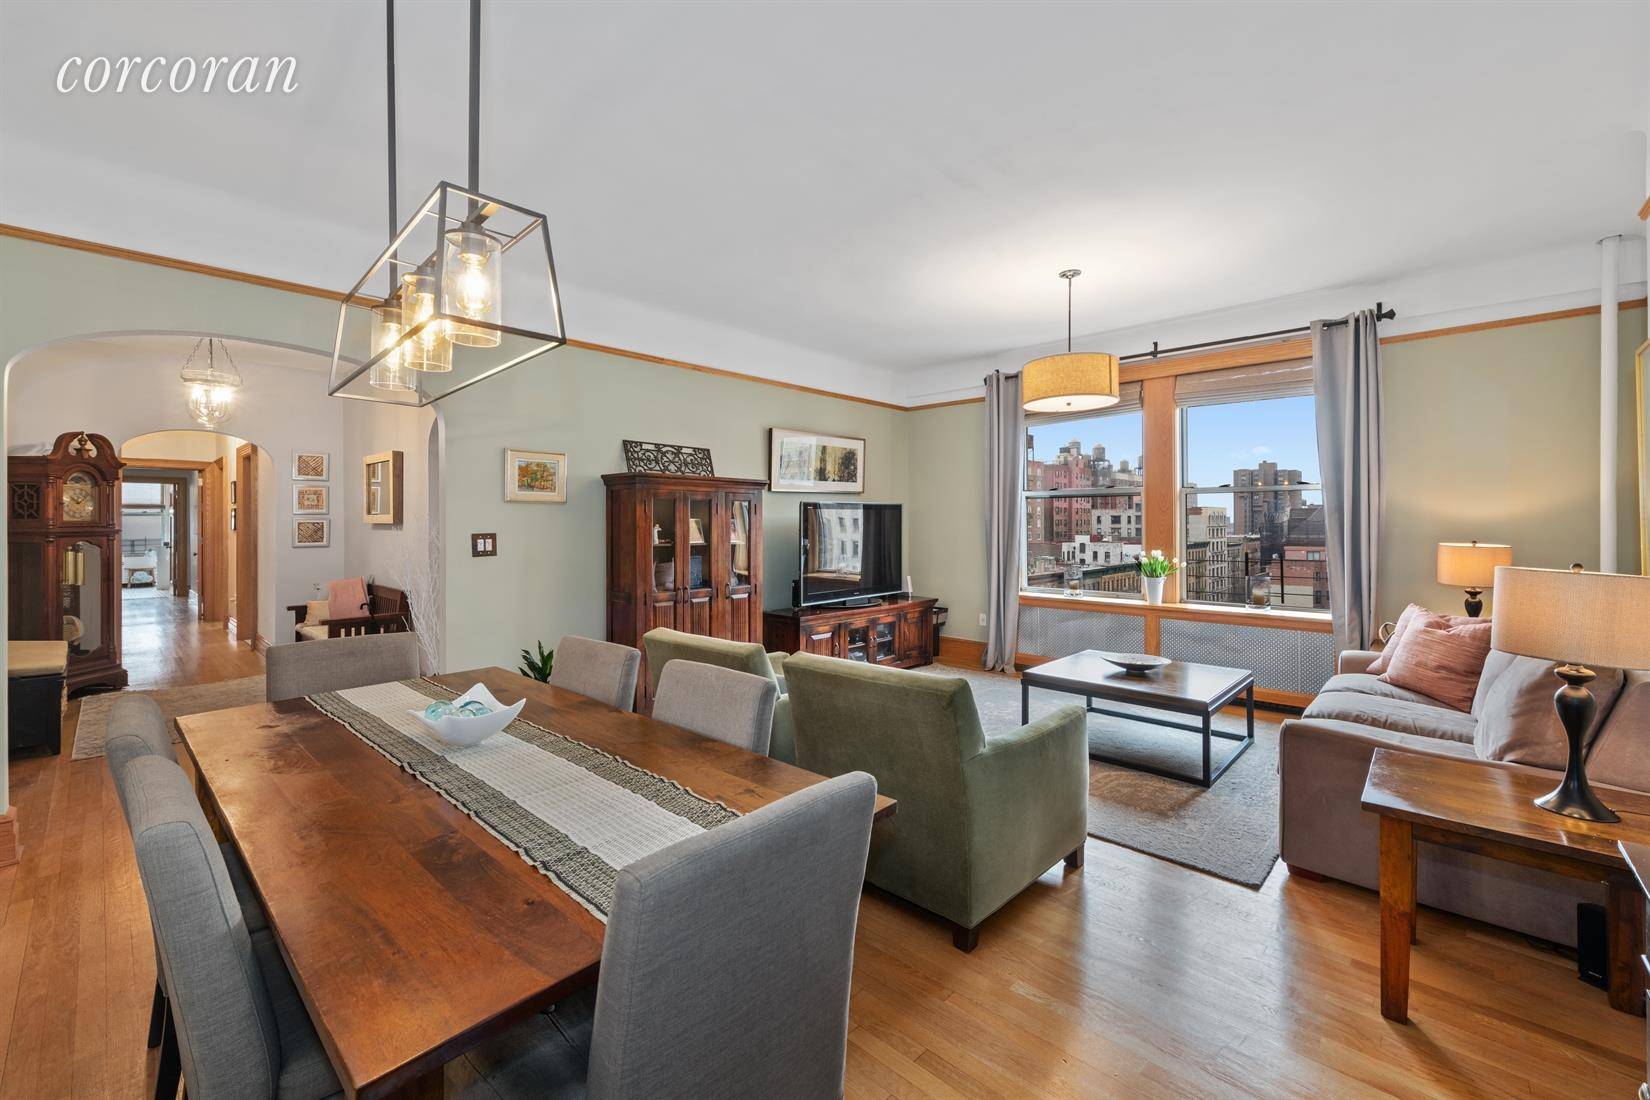 This large and gracious home is located in The Manhasset, a highly sought after beaux arts landmarked cooperative located on the Upper West Side.